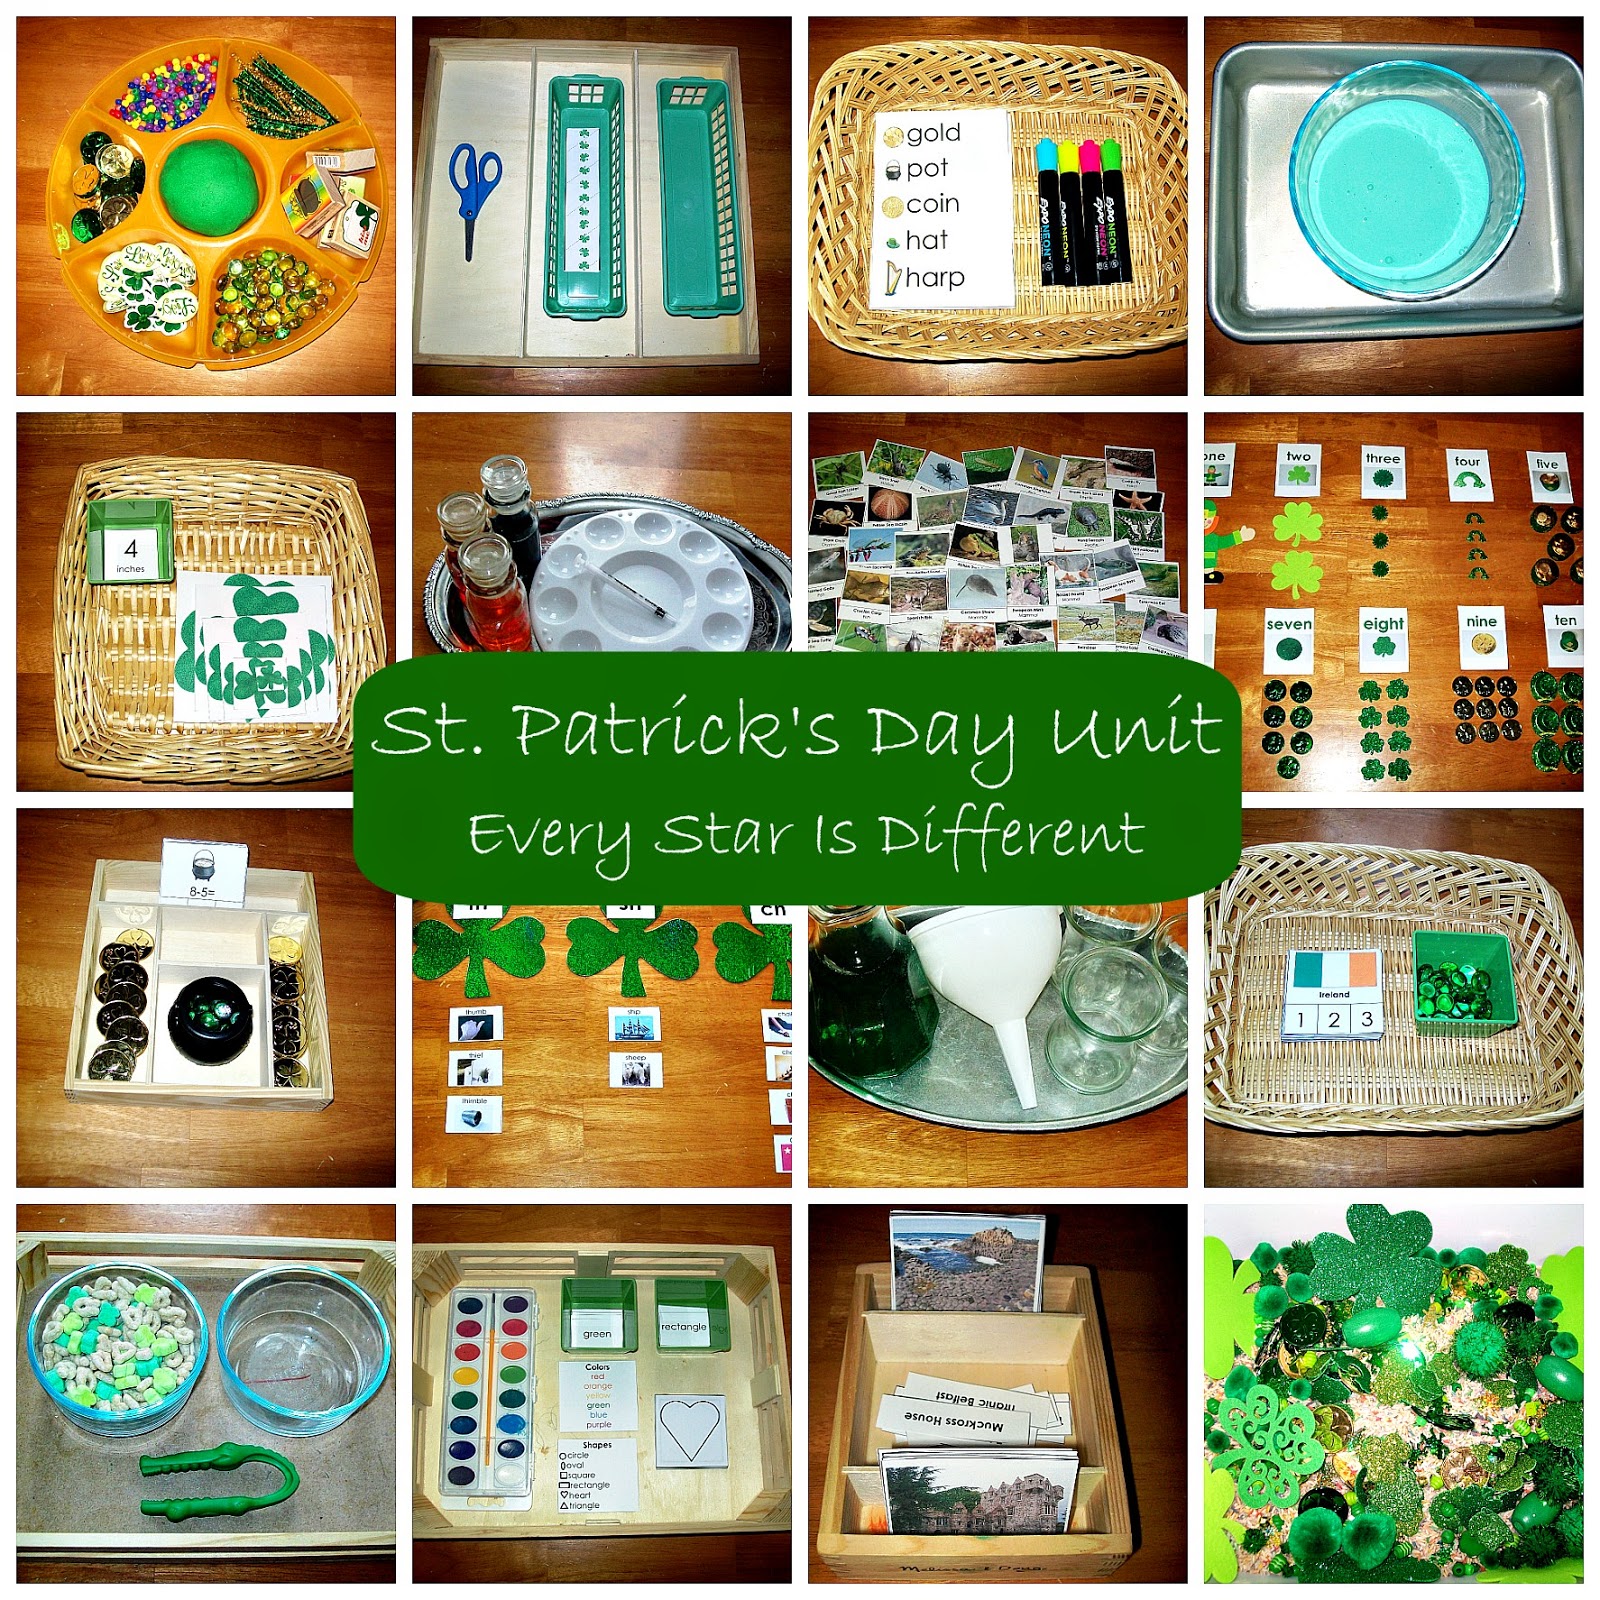 St. Patrick's Day & So Much More!